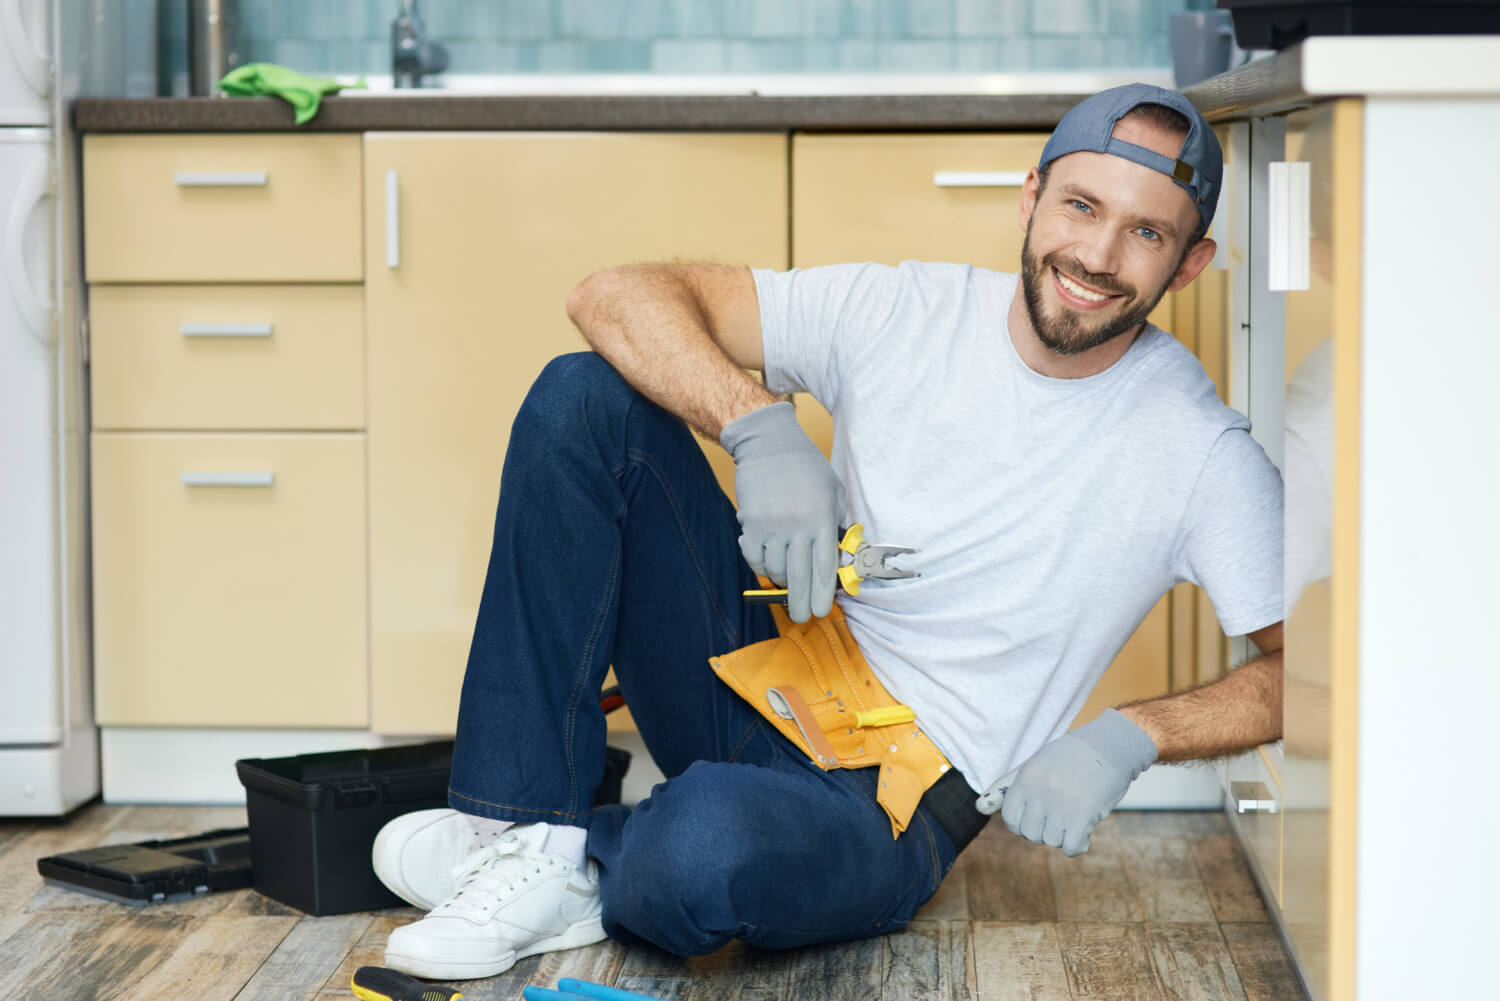 handyman sitting on kitchen floor wearing tool belt smiling on camera with open kitchen cabinet